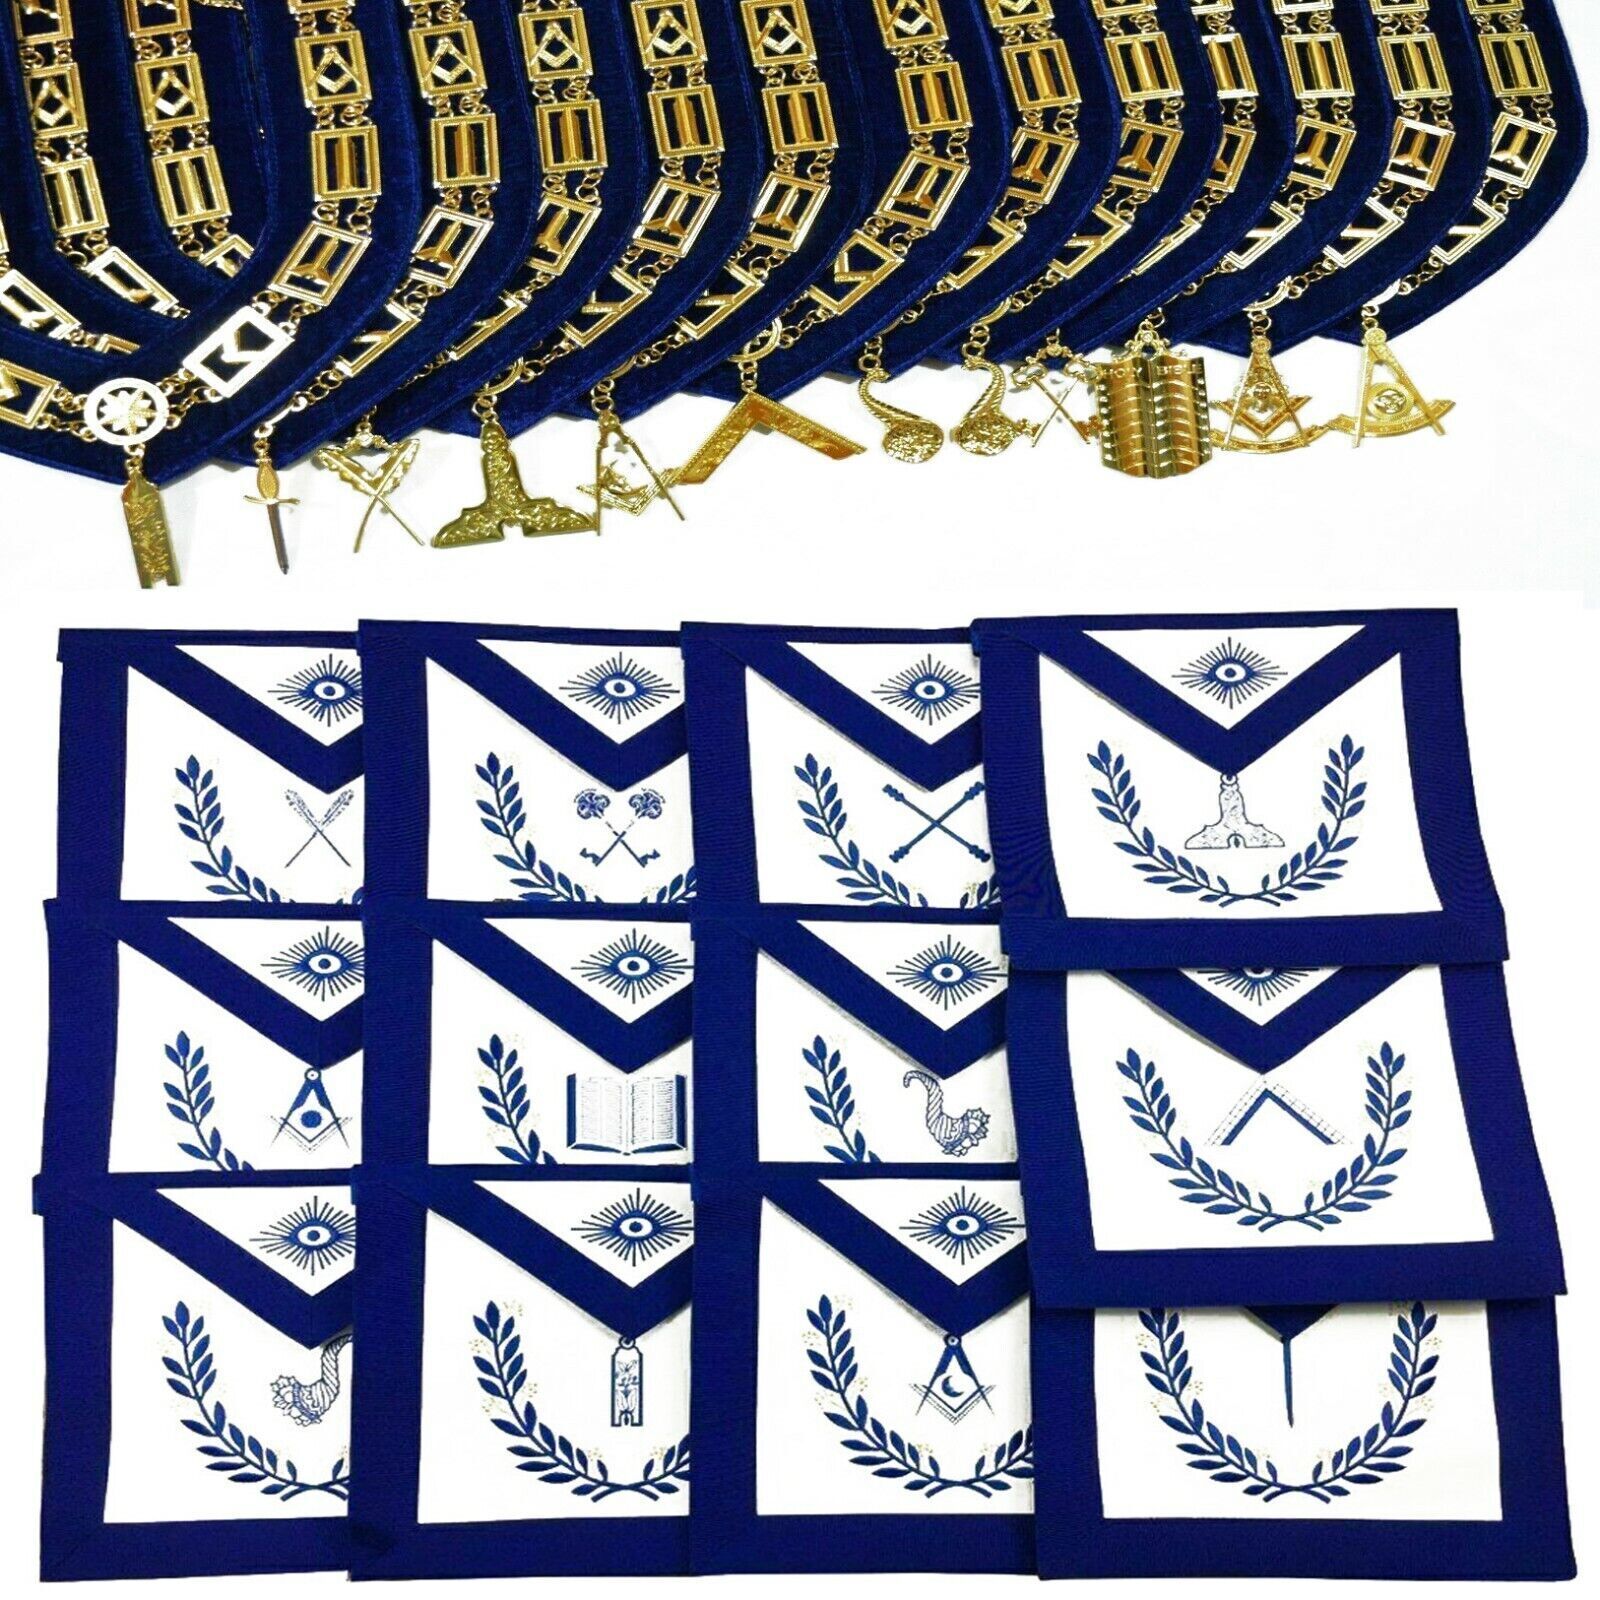 Blue Lodge Masonic Aprons & Chain Collar  With Gold jewels Set of 12